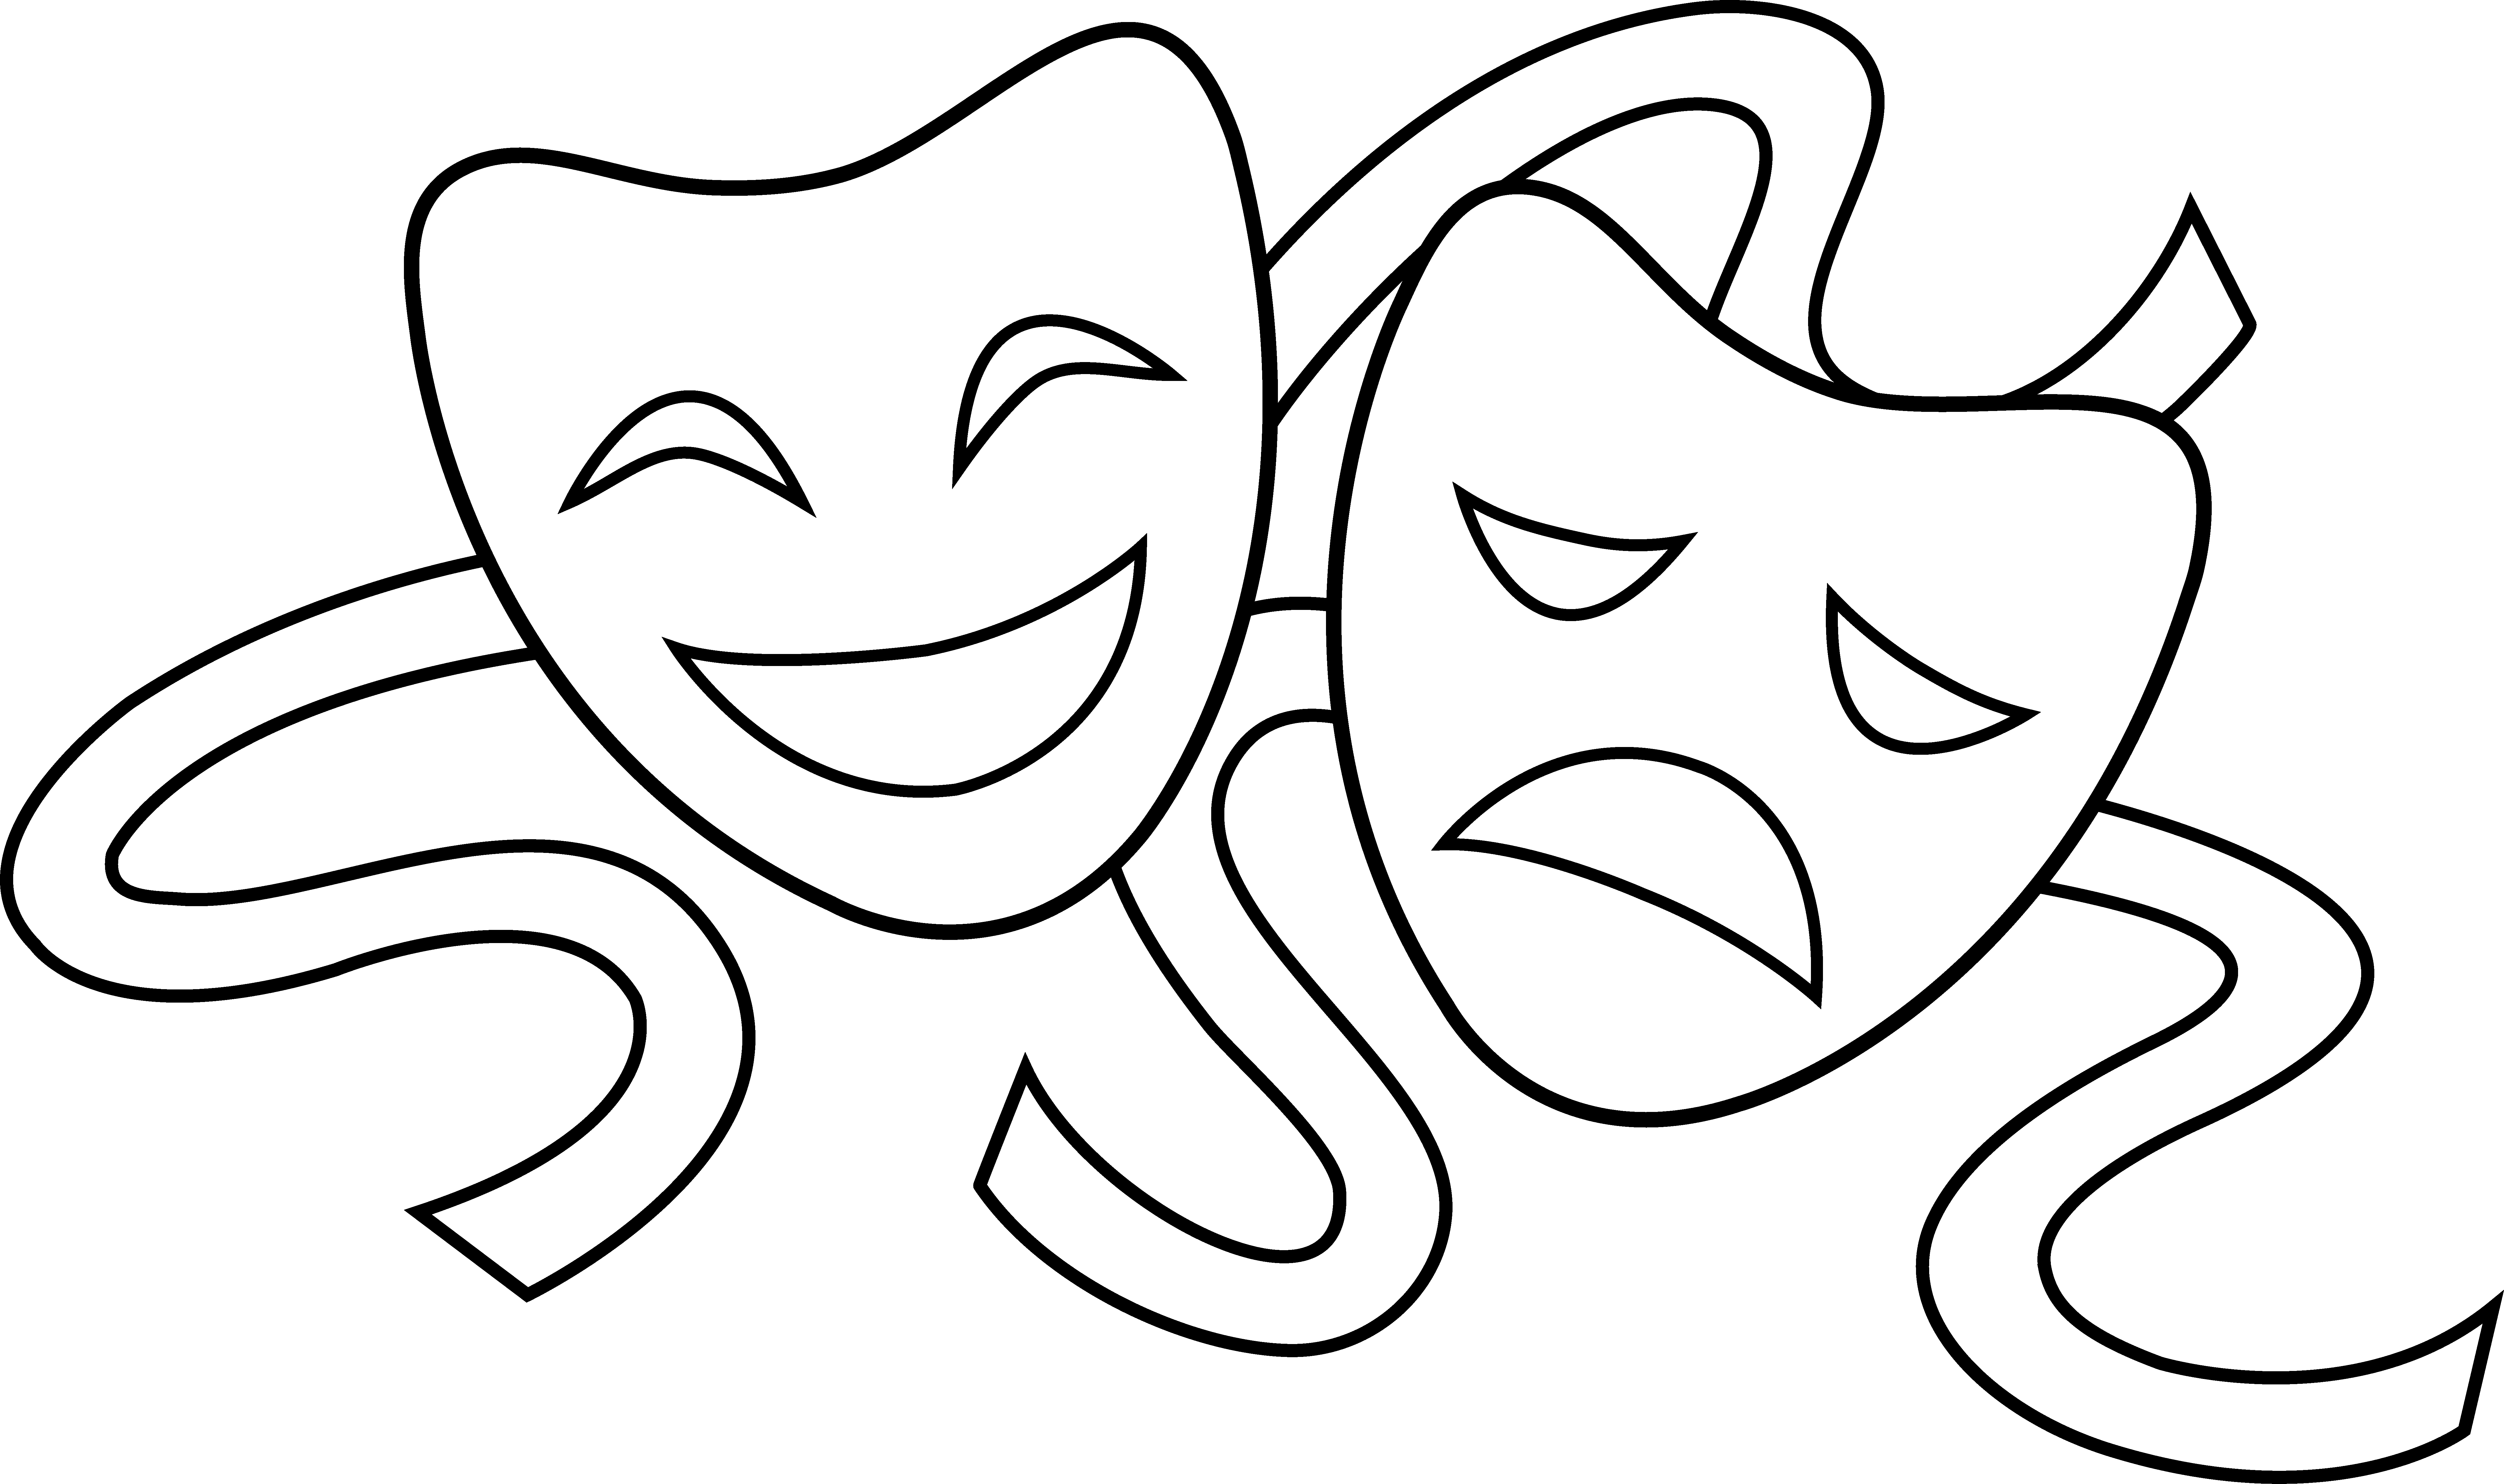 Mirror clipart drama. Theater masks outline signs